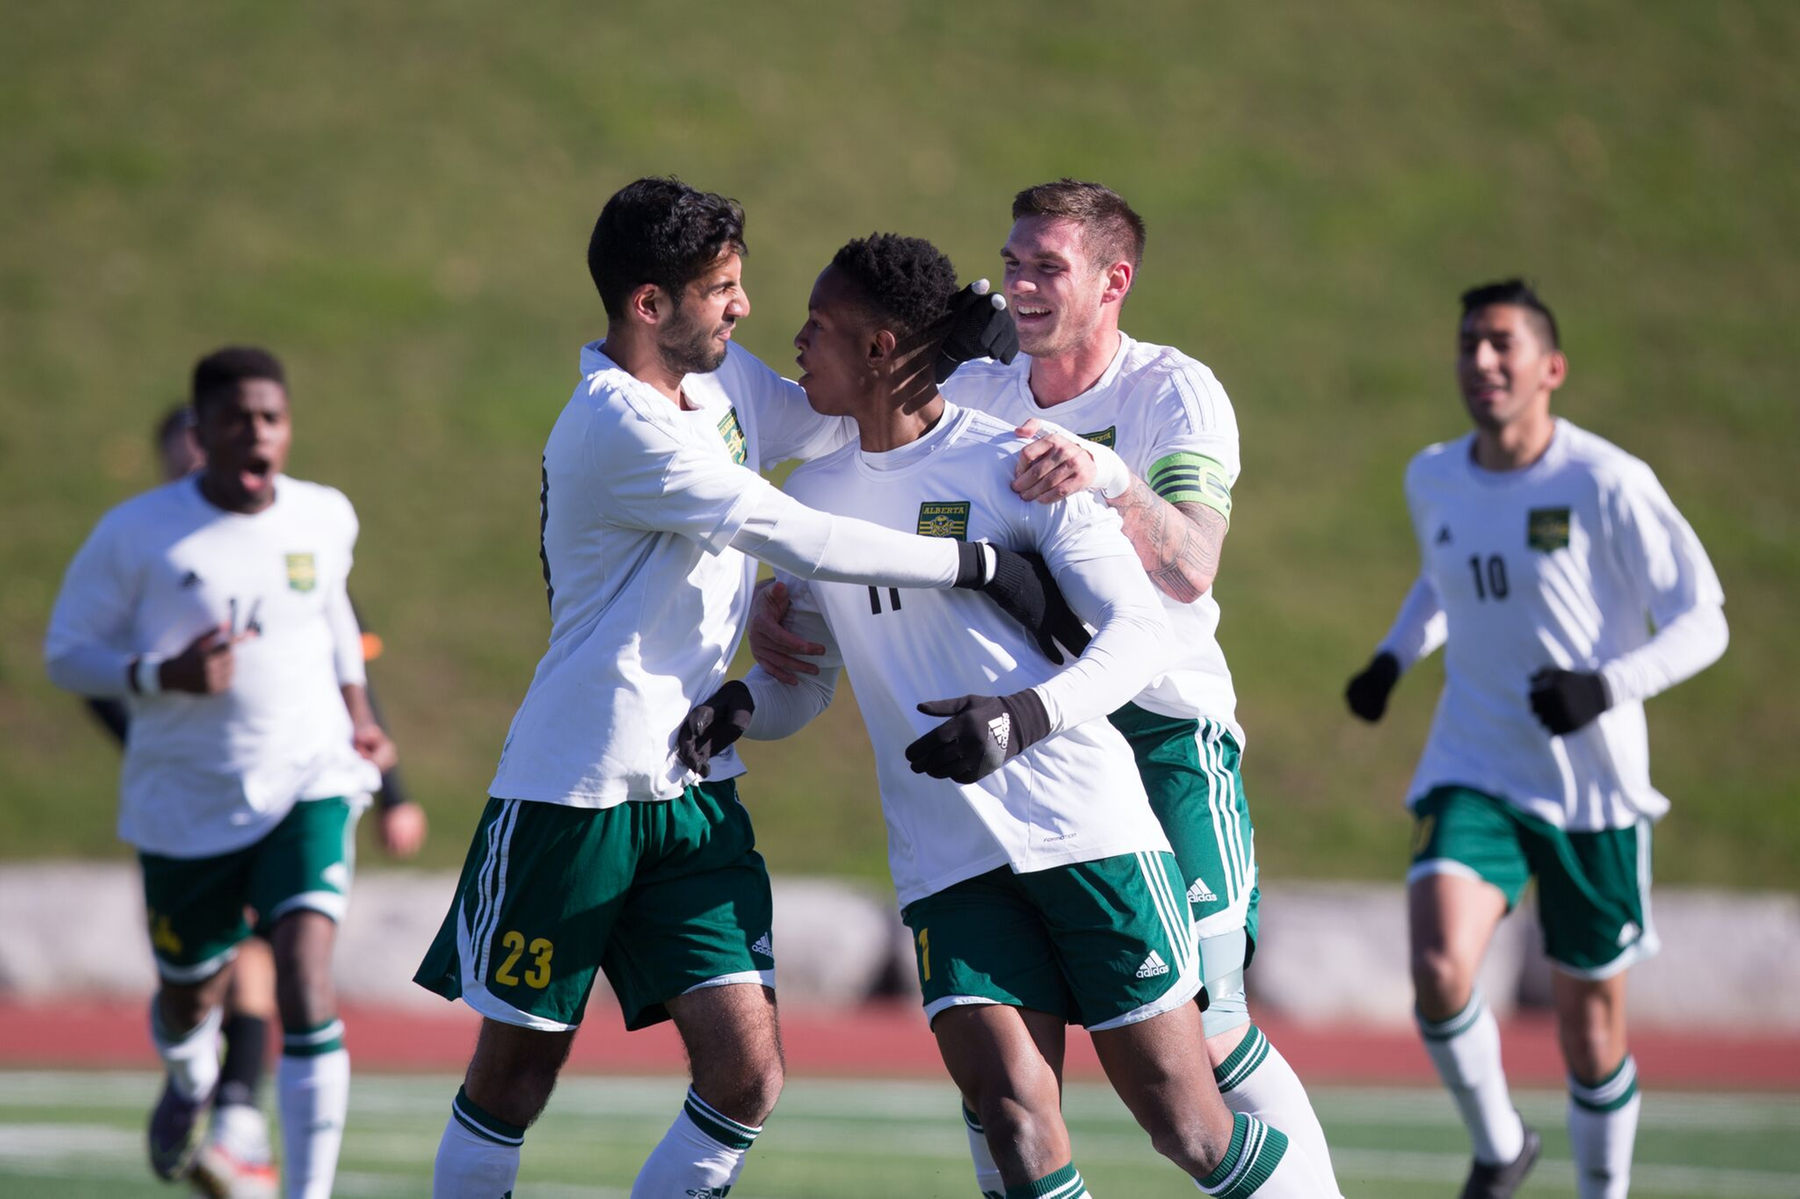 SEMIFINAL #1 2016 men’s soccer championship: Golden Bears advance to championship match with thrilling 2-1 win over Cape Breton